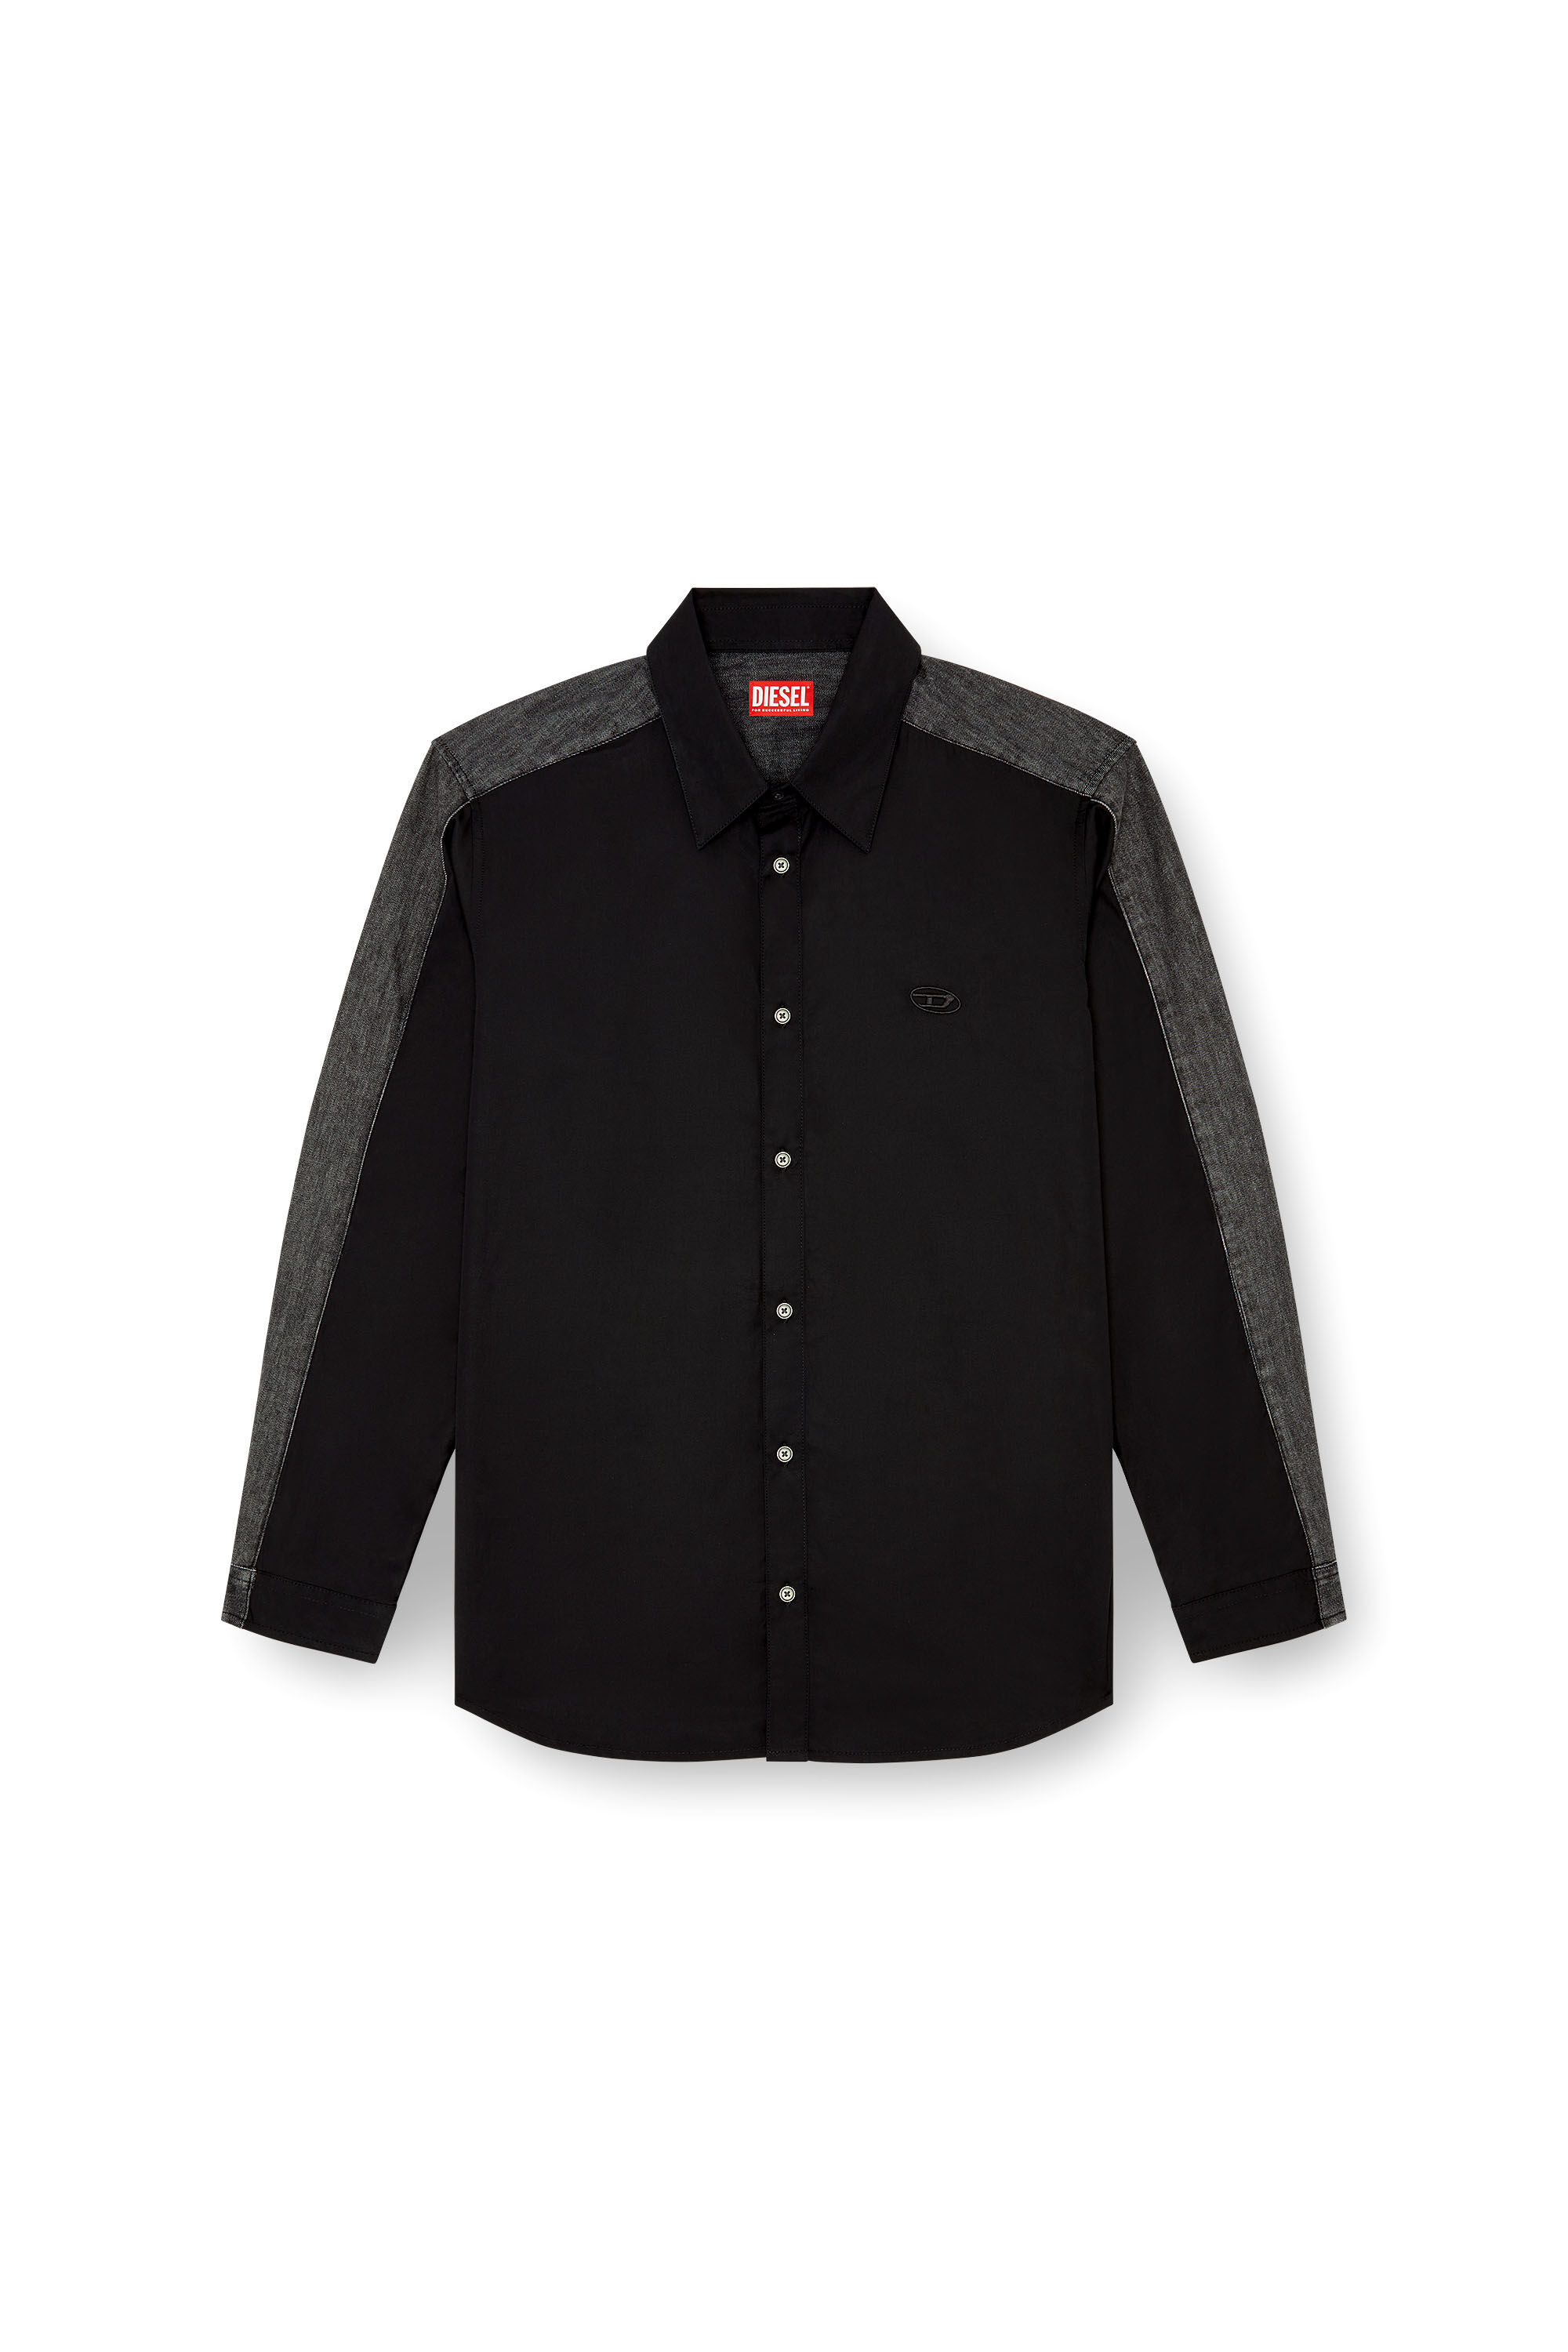 Diesel - S-SIMPLY-DNM, Man Shirt in cotton poplin and denim in Multicolor - Image 2